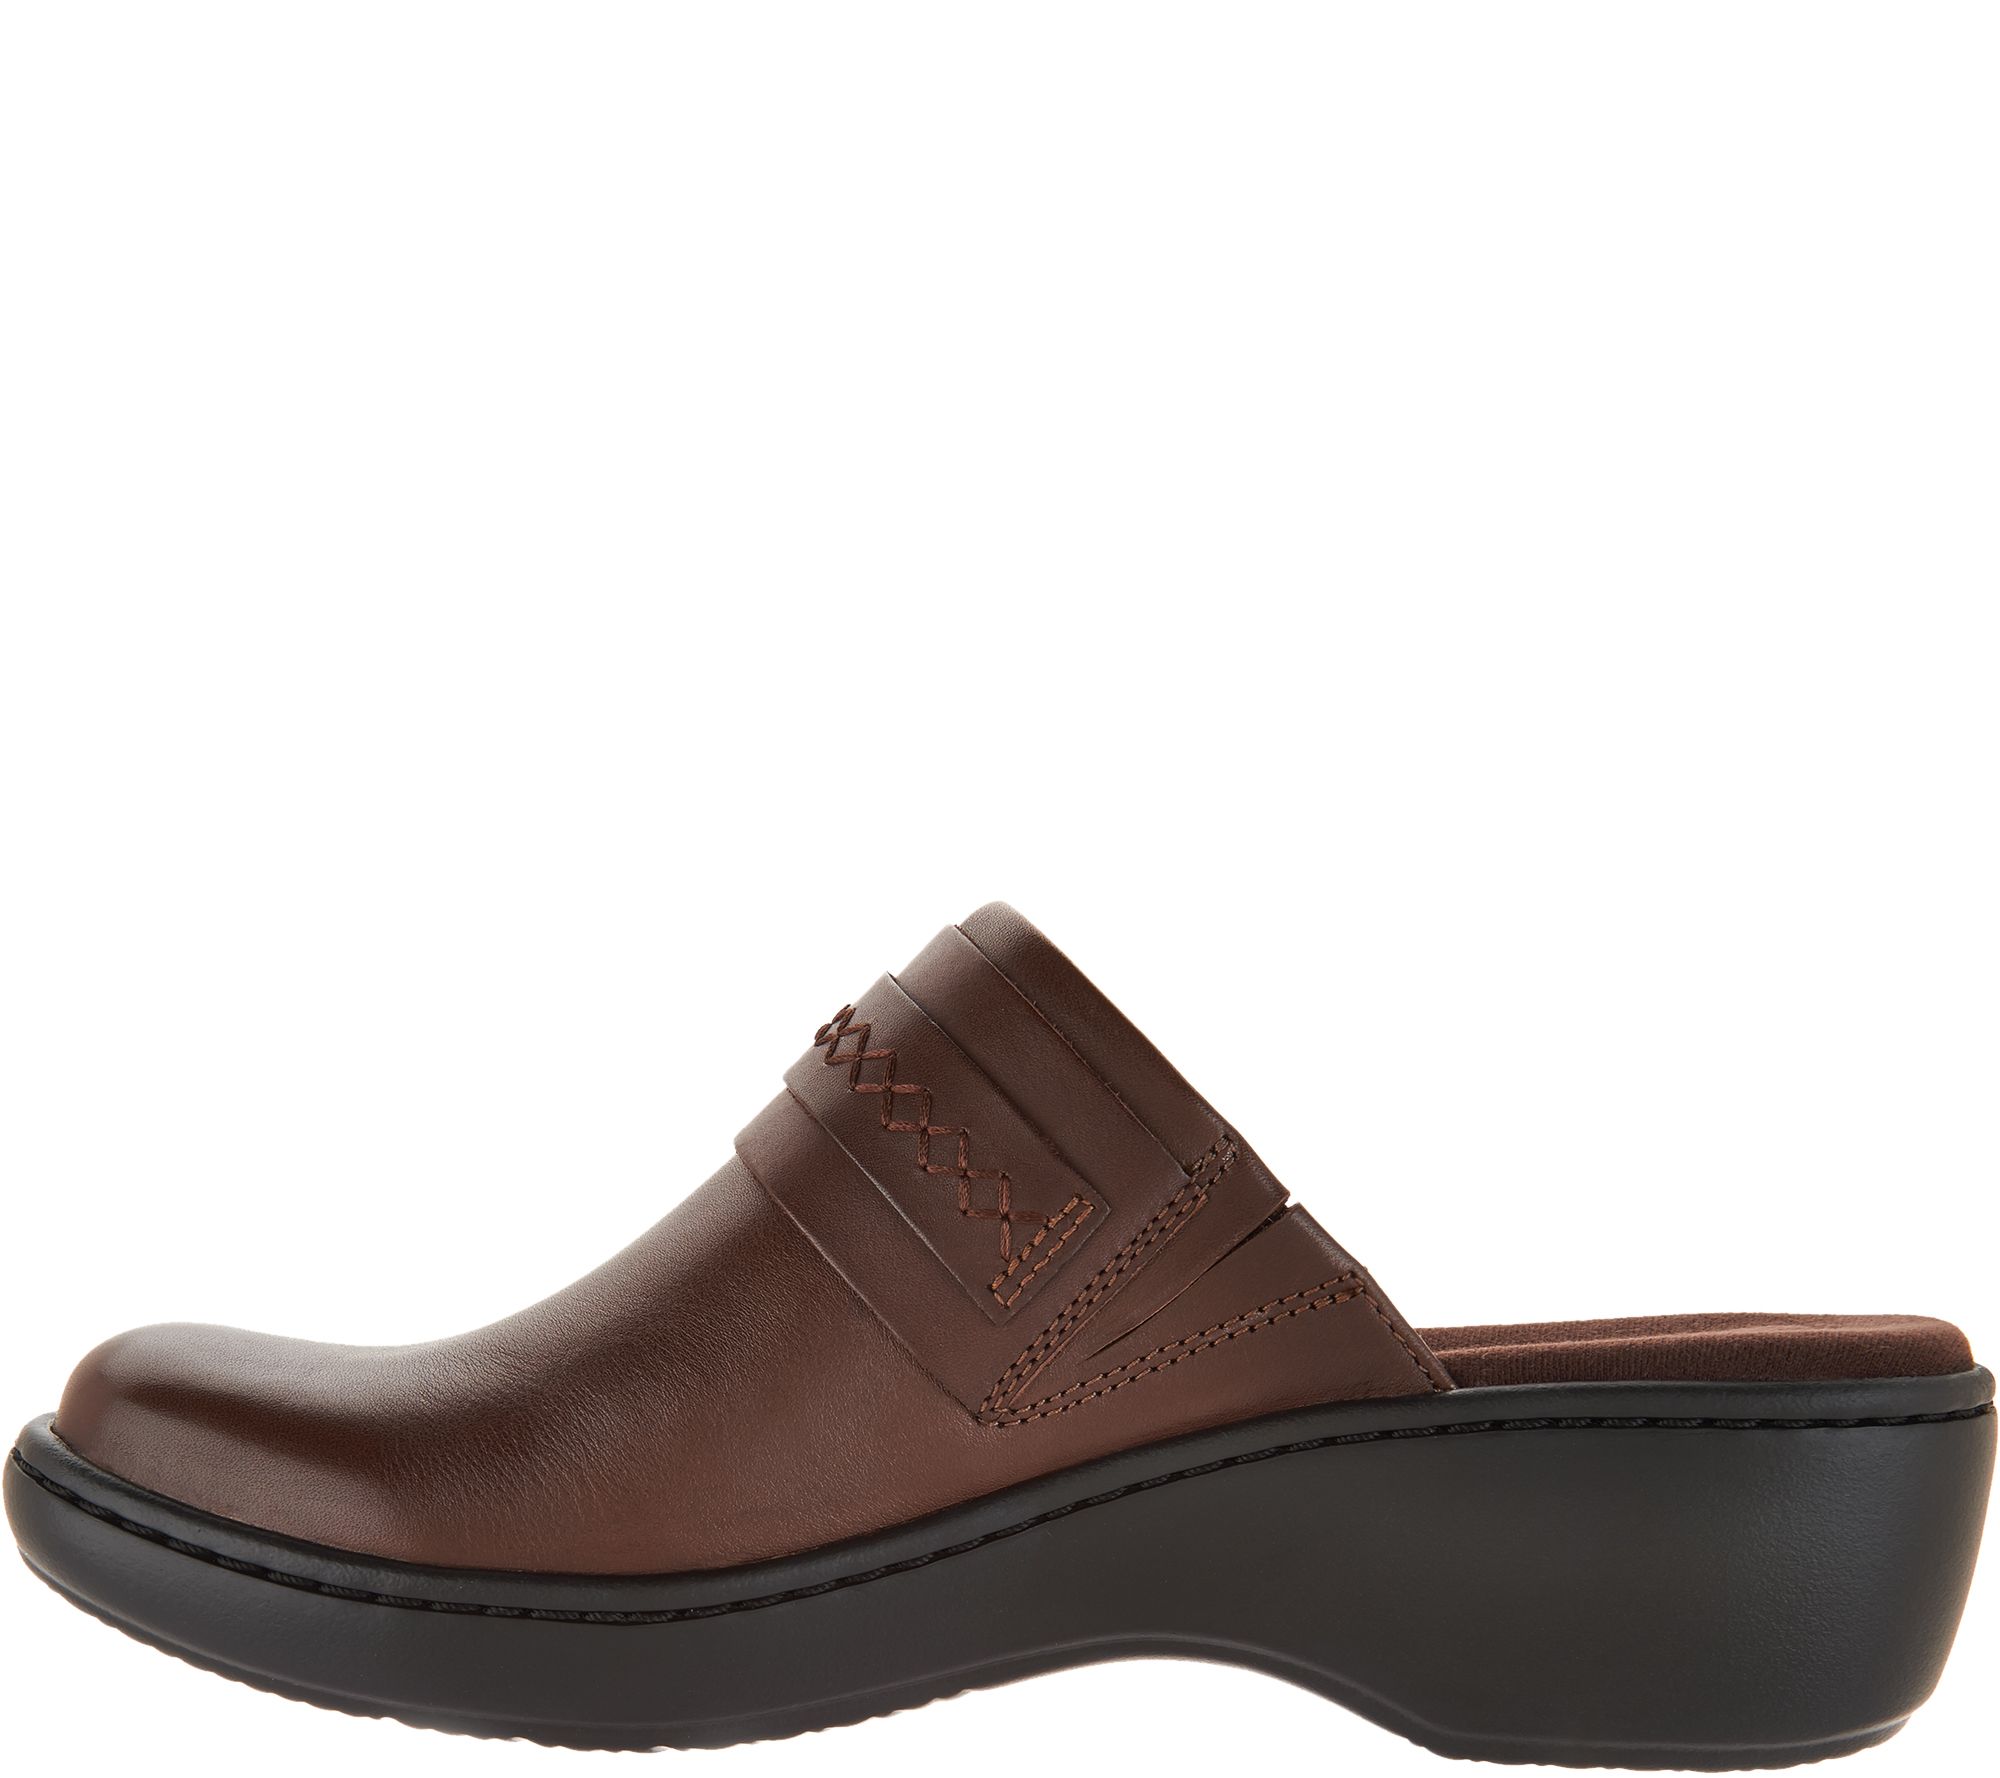 Clarks Collection Leather Clogs - Delana Amber - QVC.com